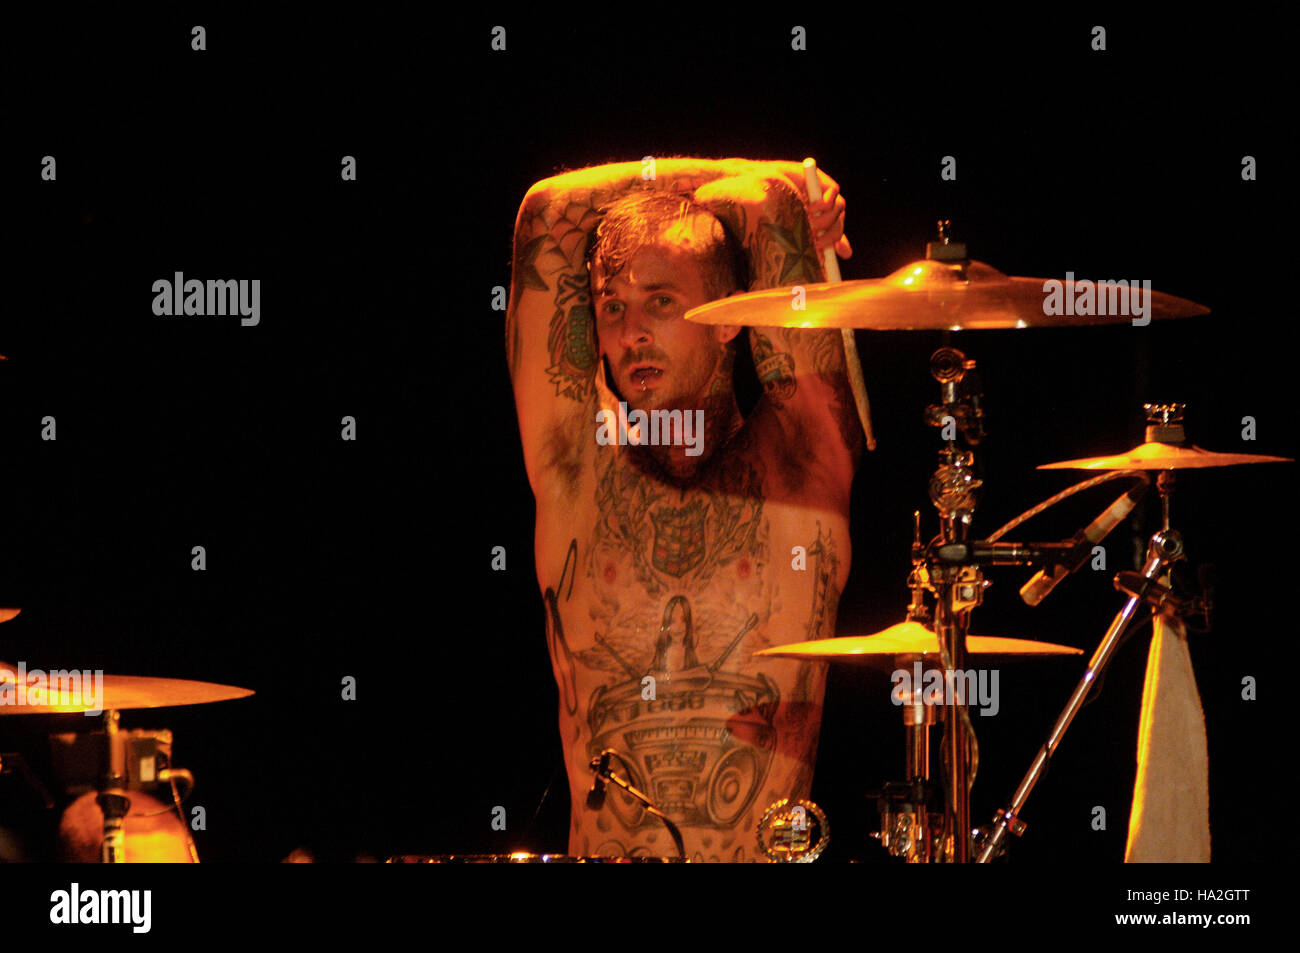 Travis Barker of +44 performs on stage at the Roxy Theatre in Hollywood, Ca Stock Photo